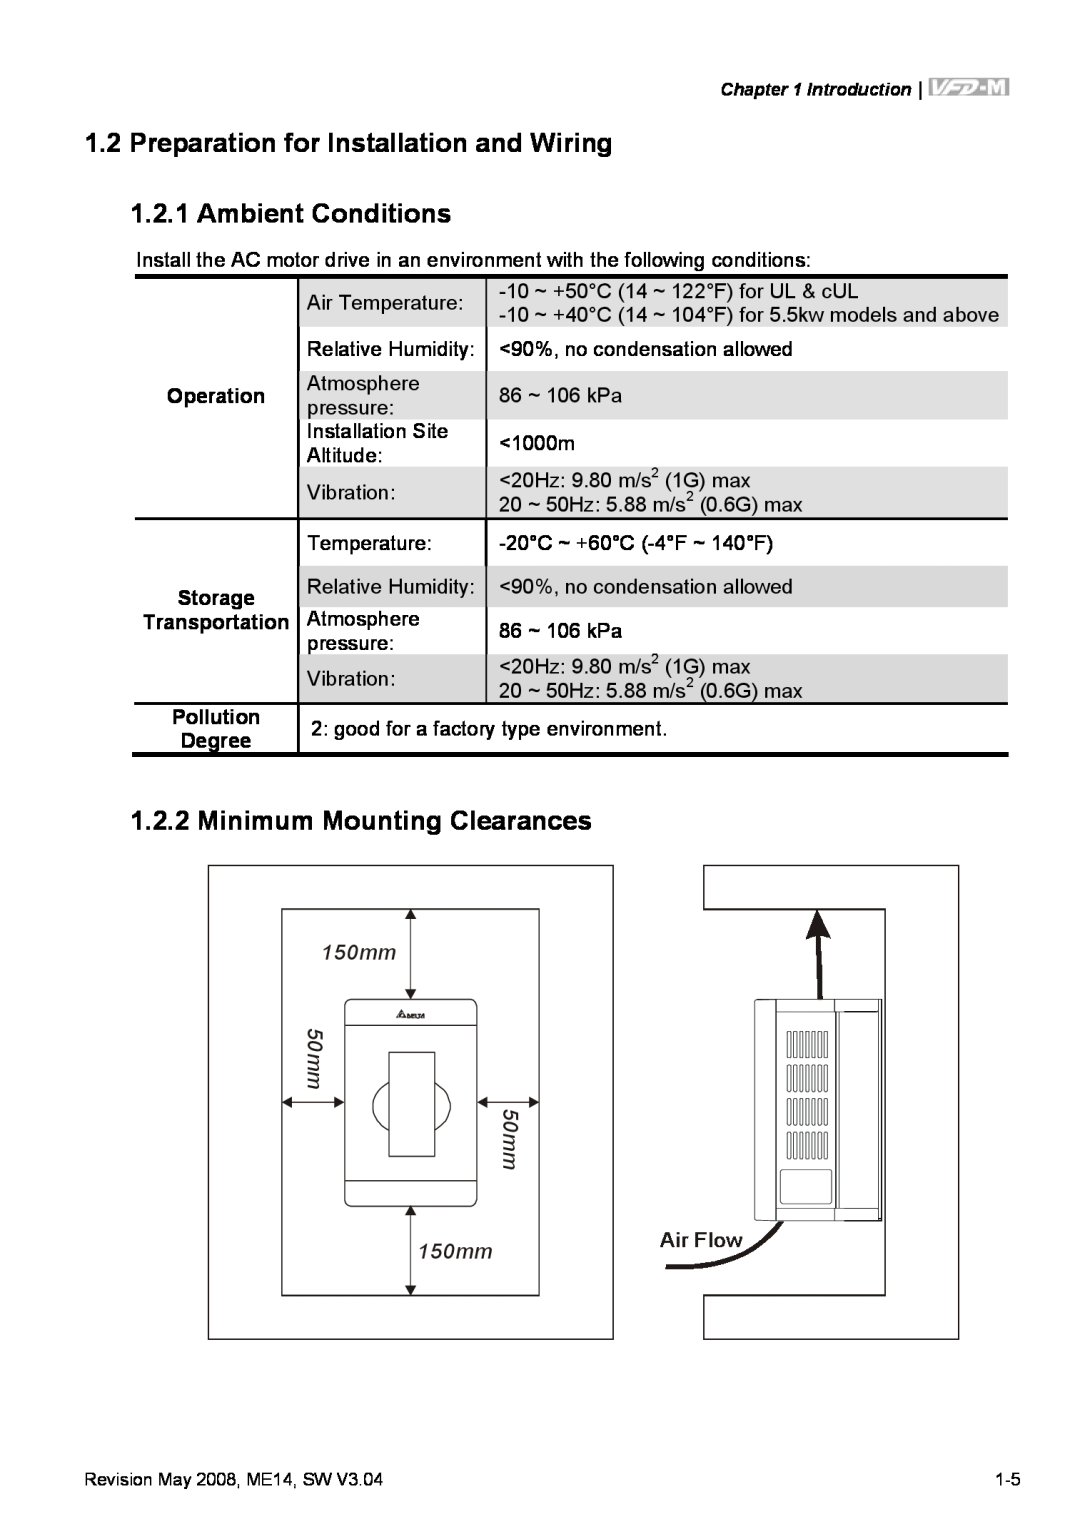 Delta Electronics VFD-M Preparation for Installation and Wiring 1.2.1 Ambient Conditions, Minimum Mounting Clearances 